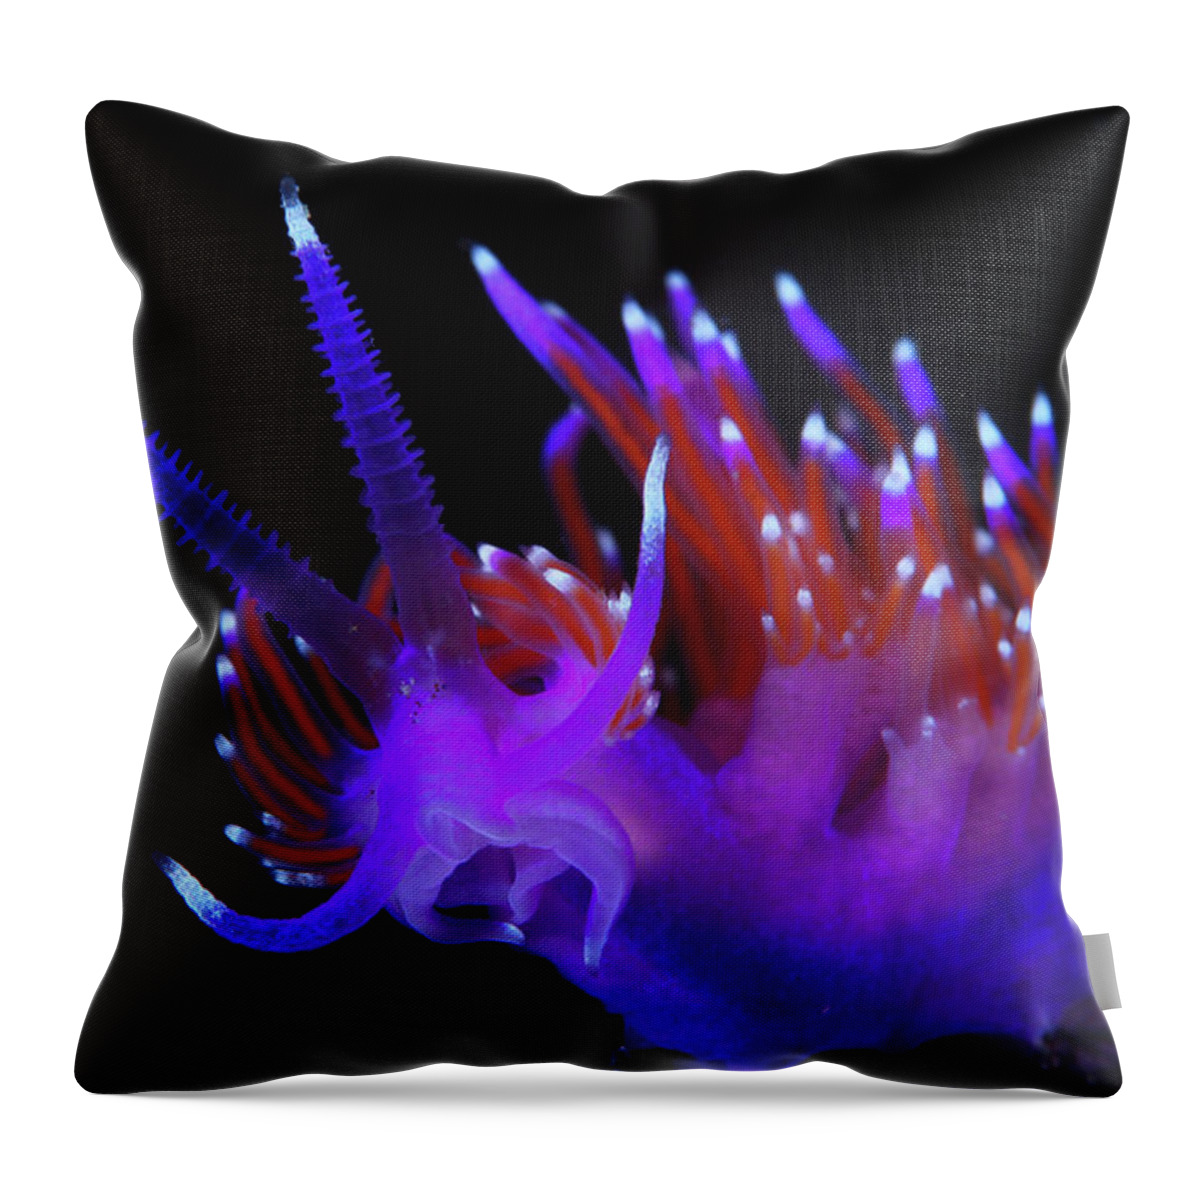 Underwater Throw Pillow featuring the photograph Nudibranch by 548901005677